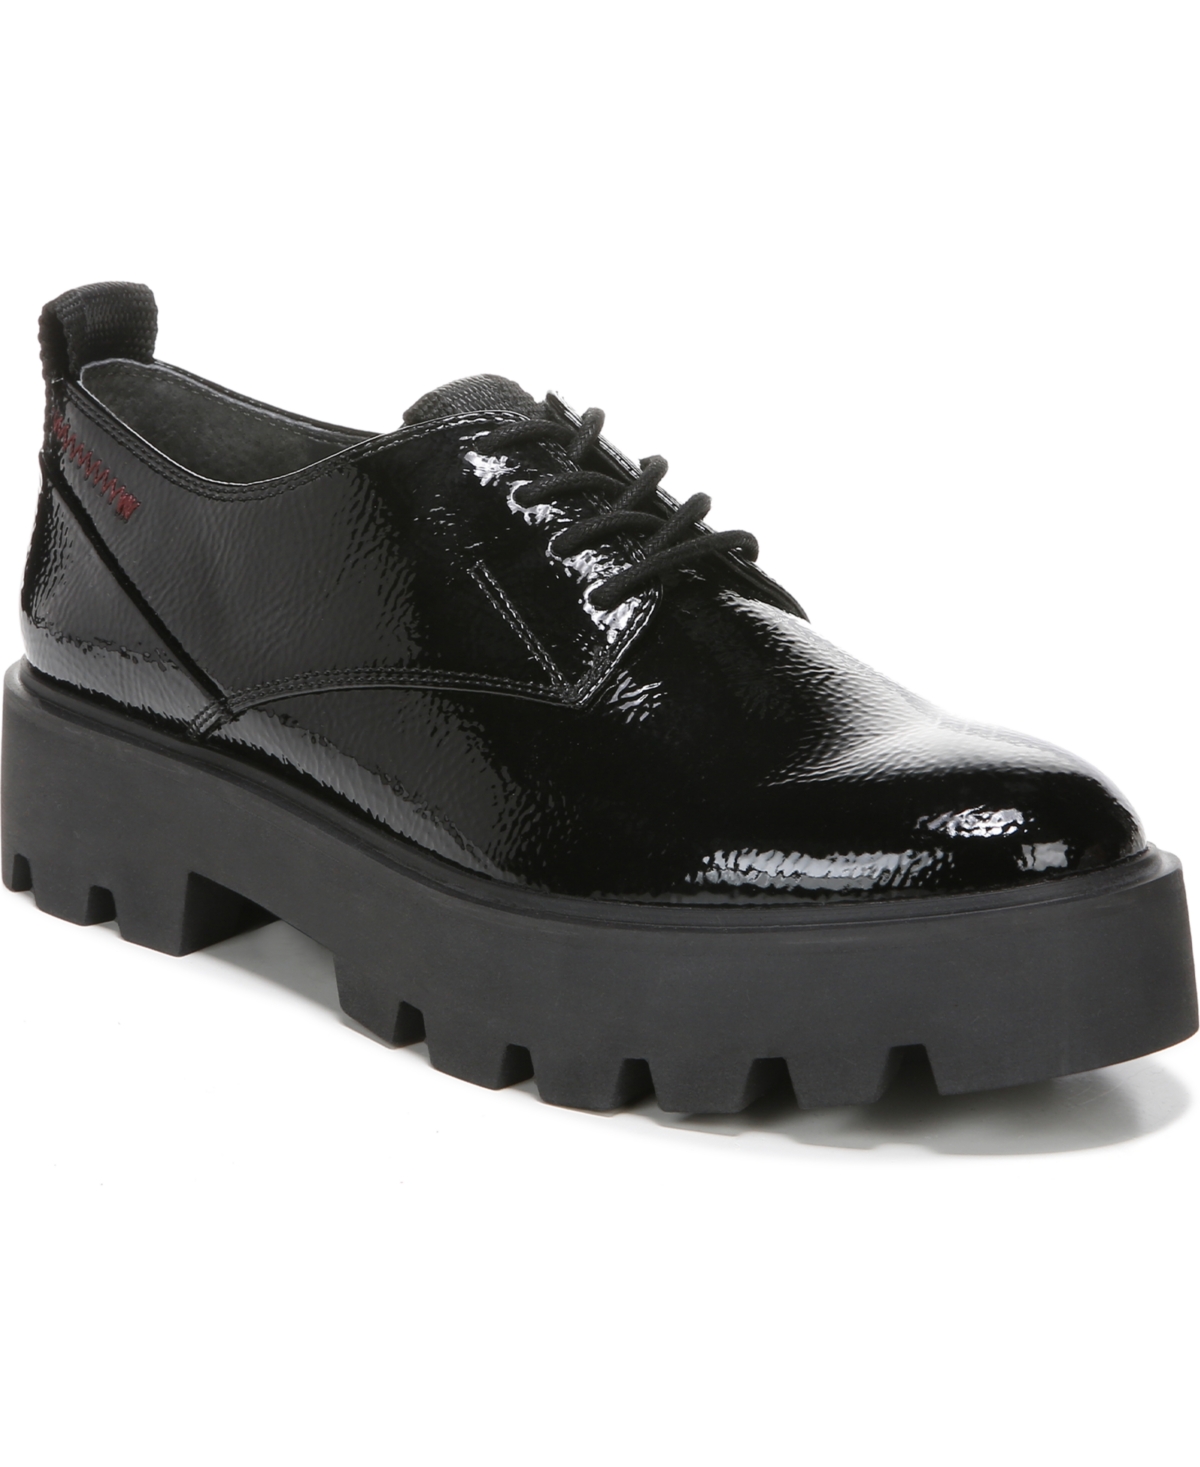 UPC 017138587358 product image for Franco Sarto Balin Laced Lug Sole Oxfords Women's Shoes | upcitemdb.com